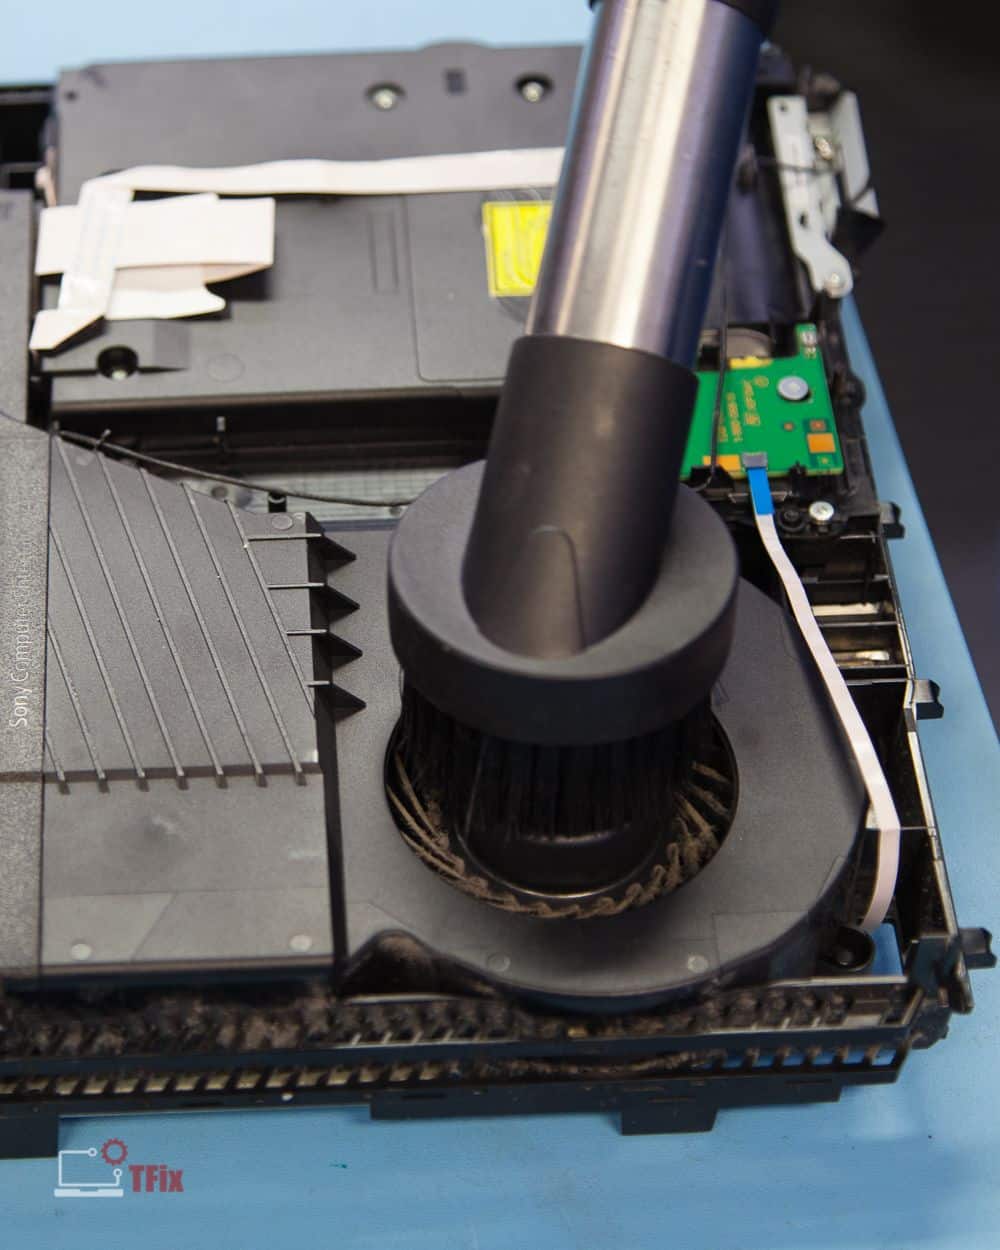 PlayStation 4 overheating repair #ps4 #xboxone #ps3 #playstation #xbox ...